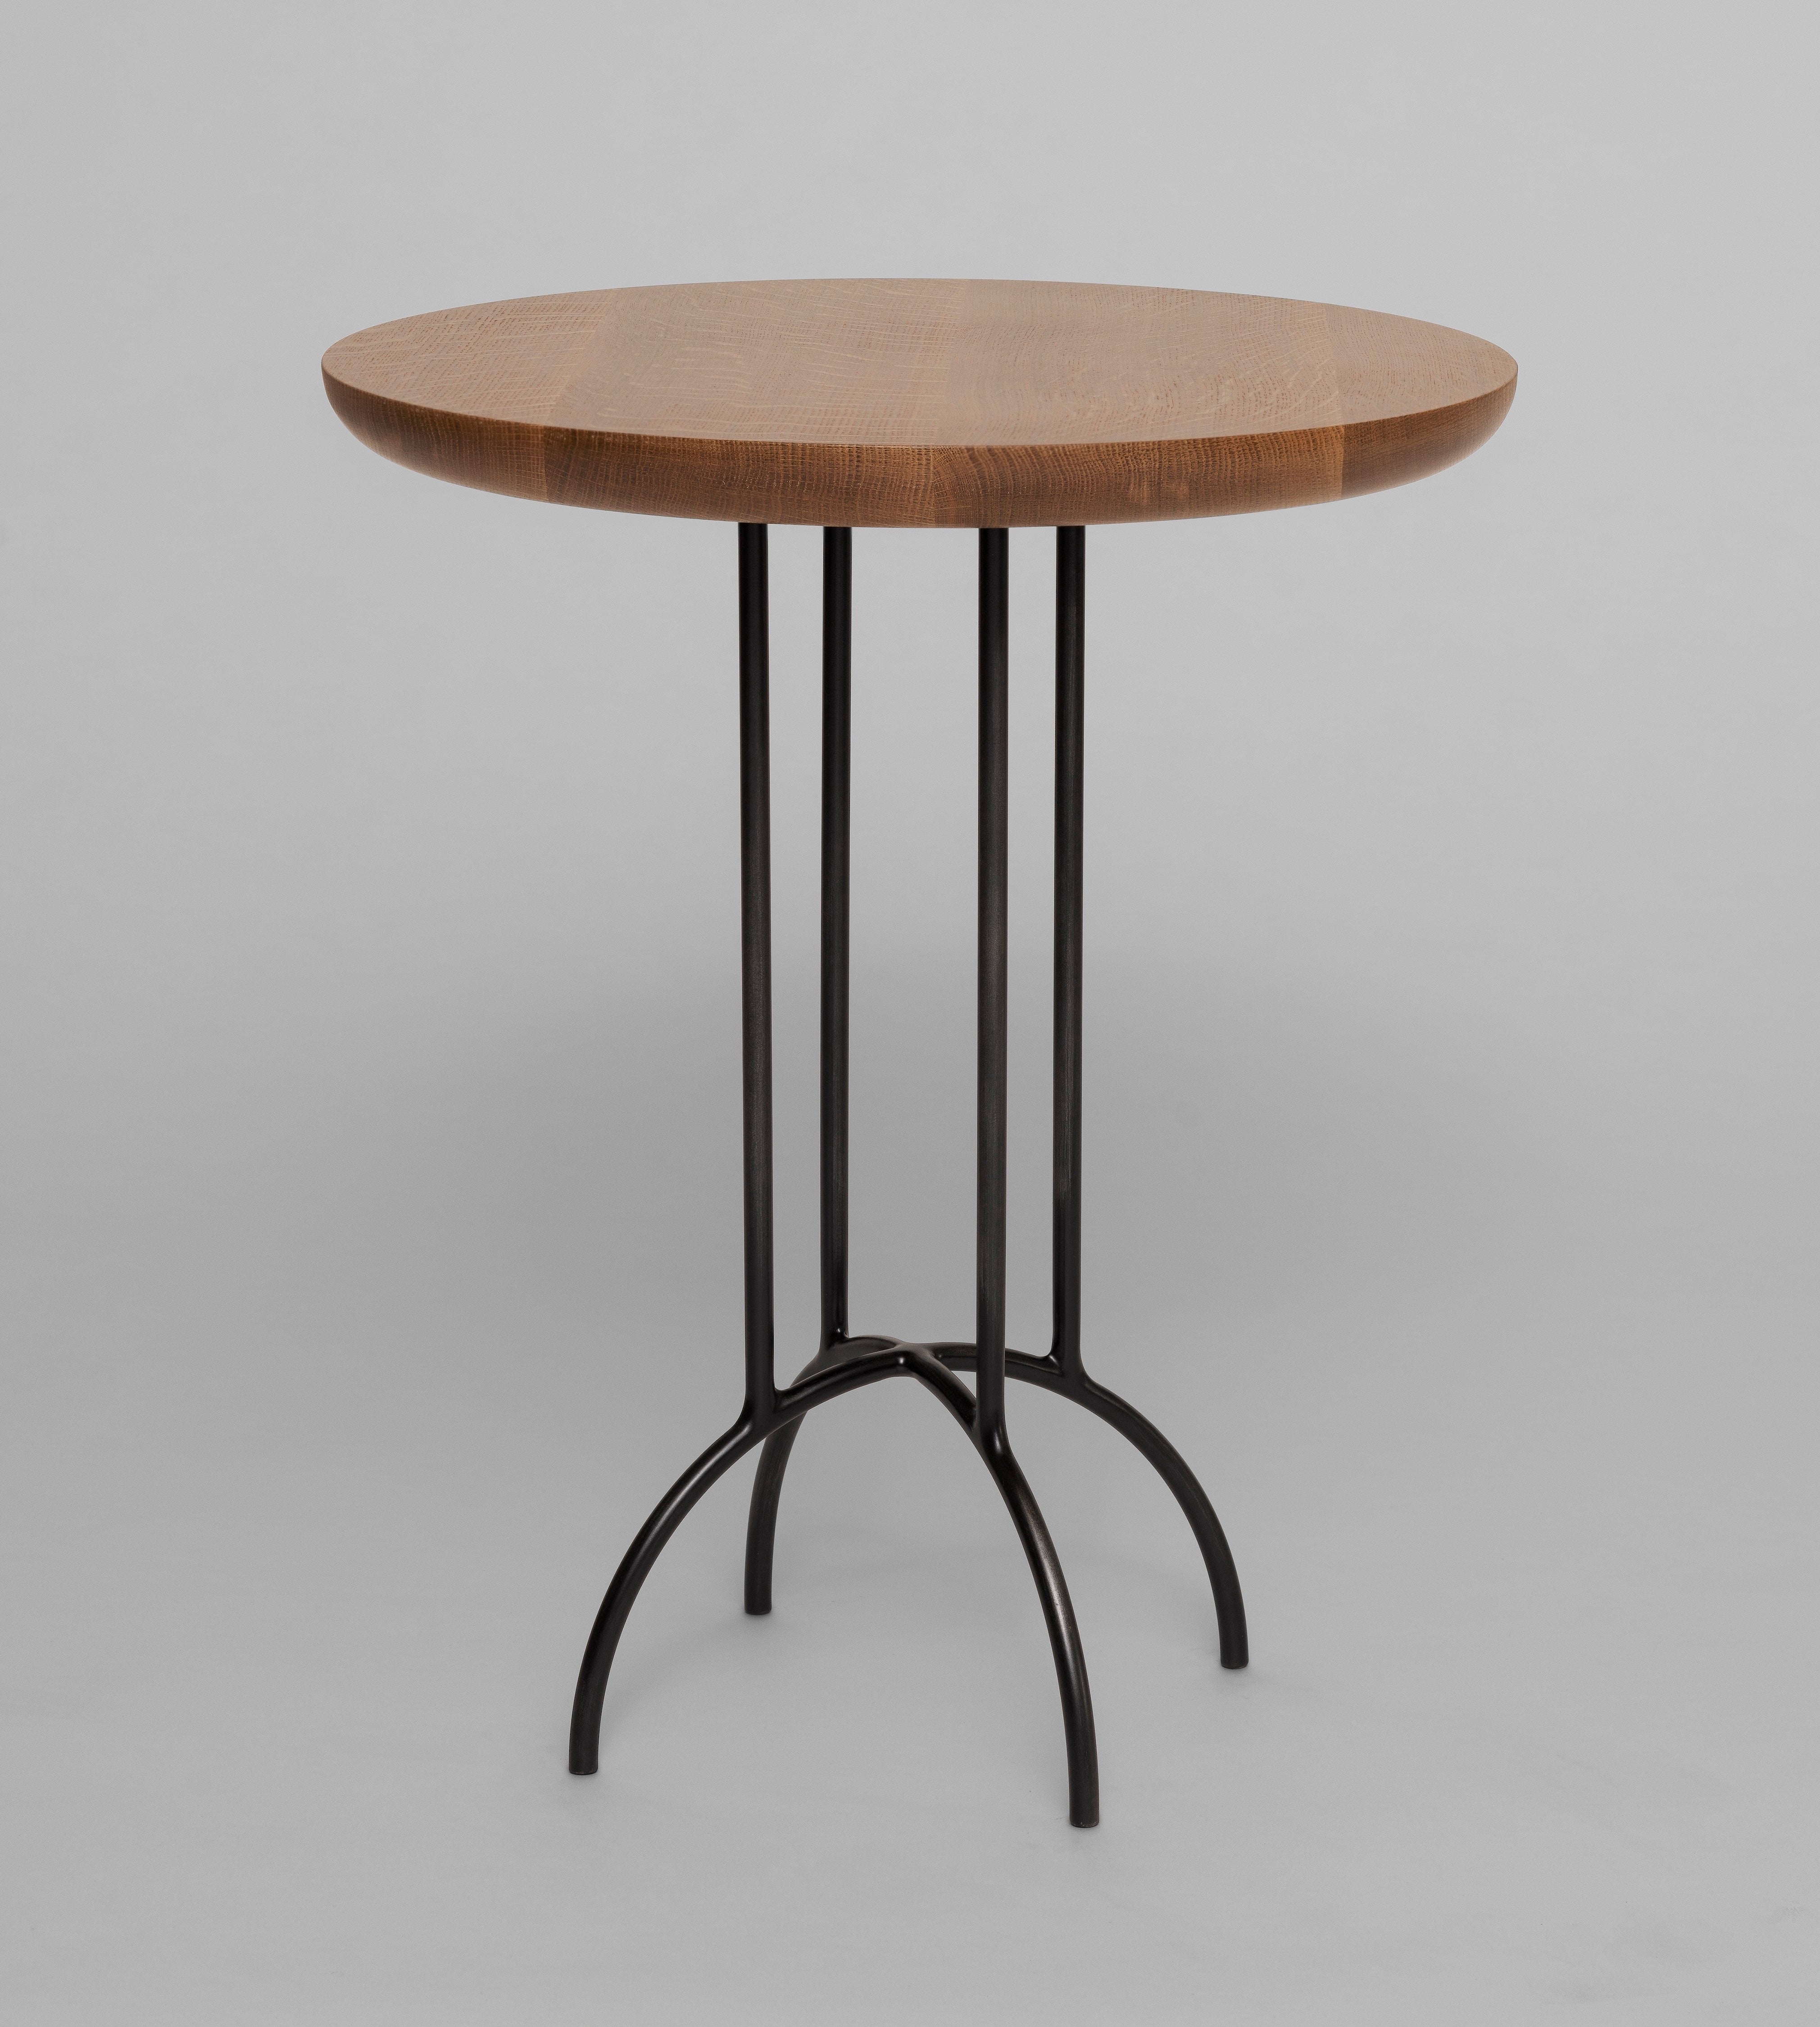 Martini Table Shown in white oak with natural finish and Midnight metal finish